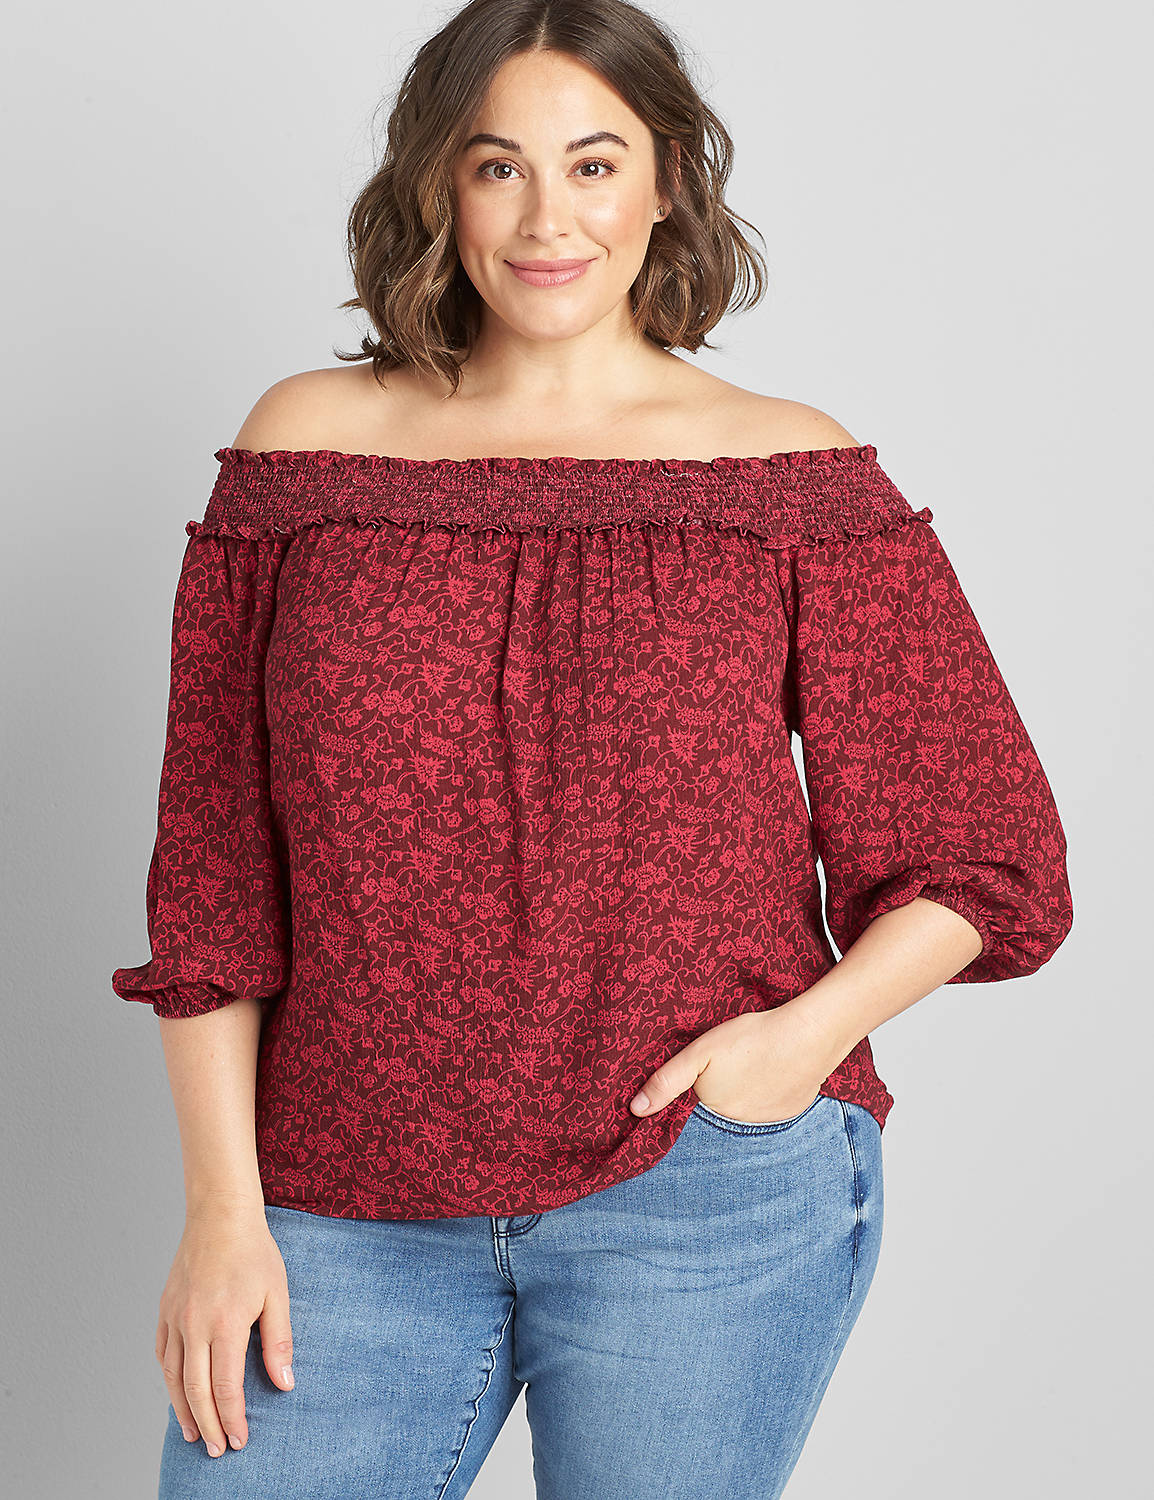 3/4 Sleeve Off-the-Shoulder Top Product Image 1